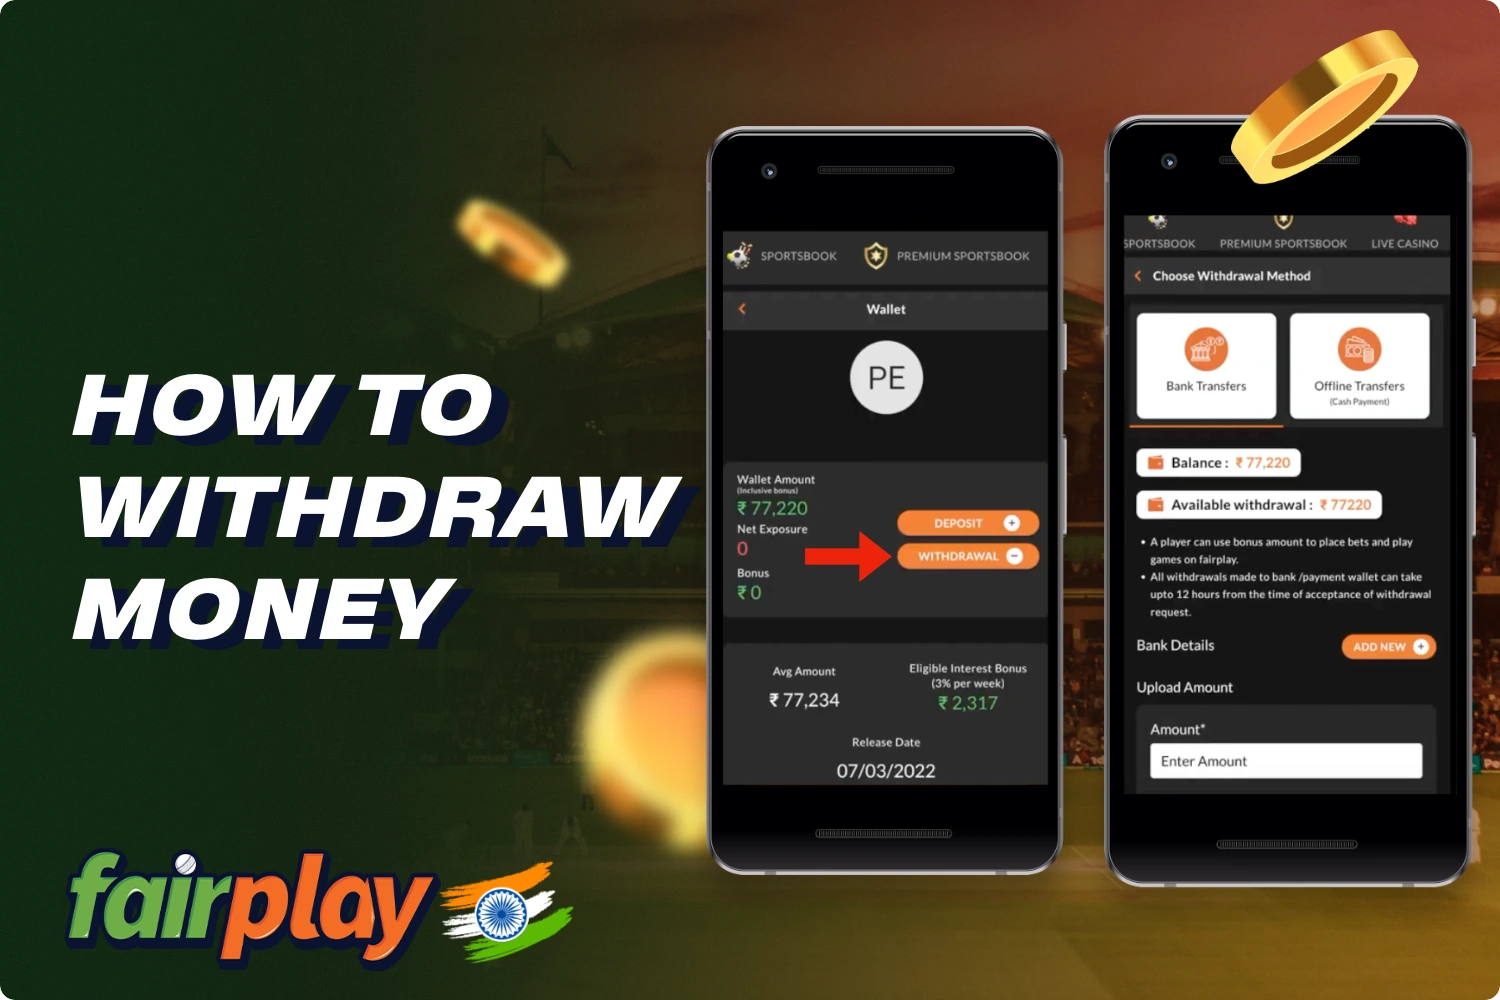 In order to withdraw money from the Fairplay platform in India you need to fulfill a few mandatory conditions